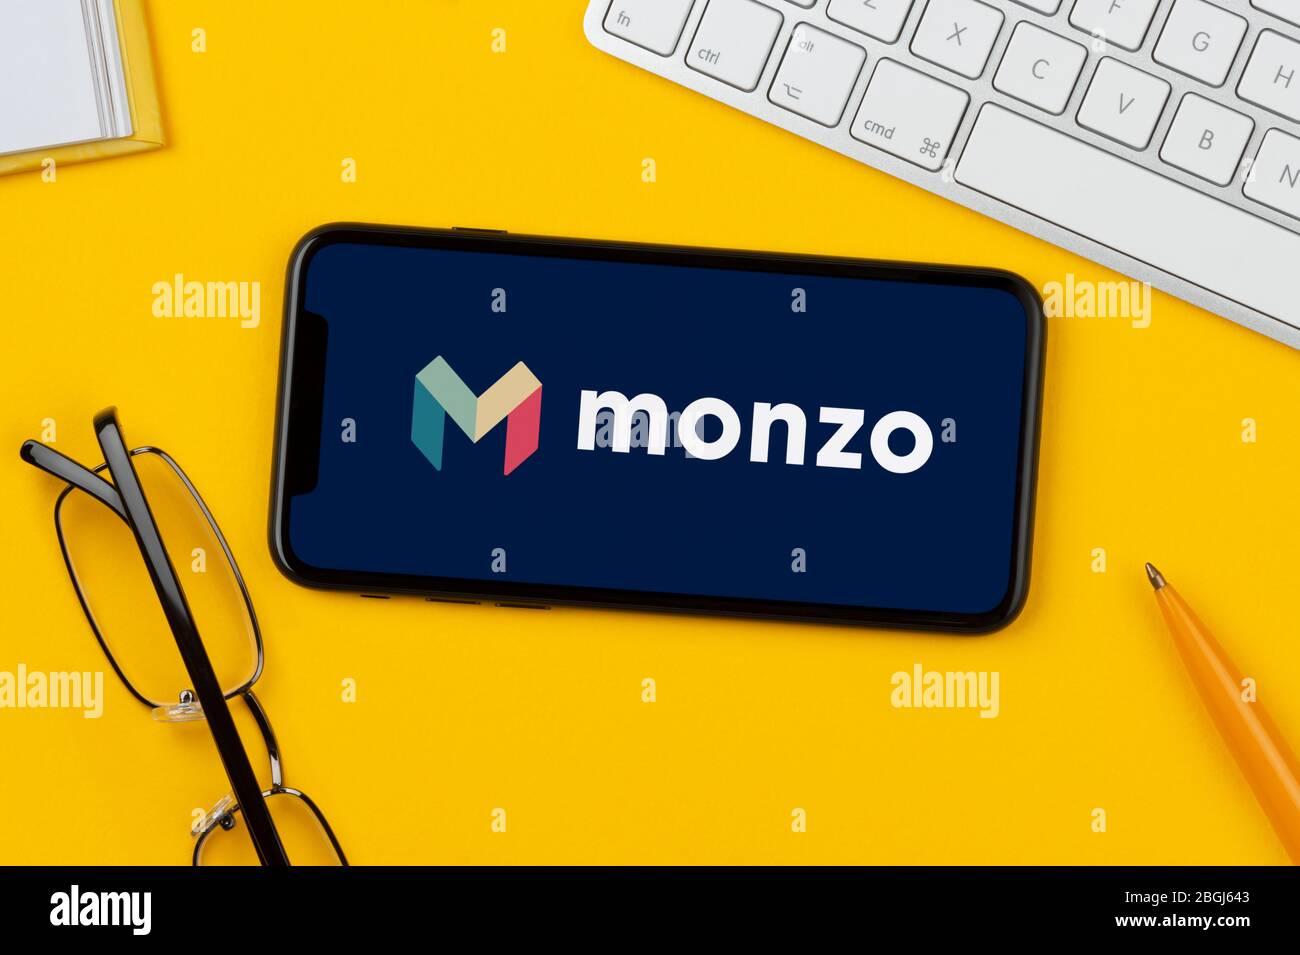 A smartphone showing the Monzo Bank logo rests on a yellow background along with a keyboard, glasses, pen and book (Editorial use only). Stock Photo